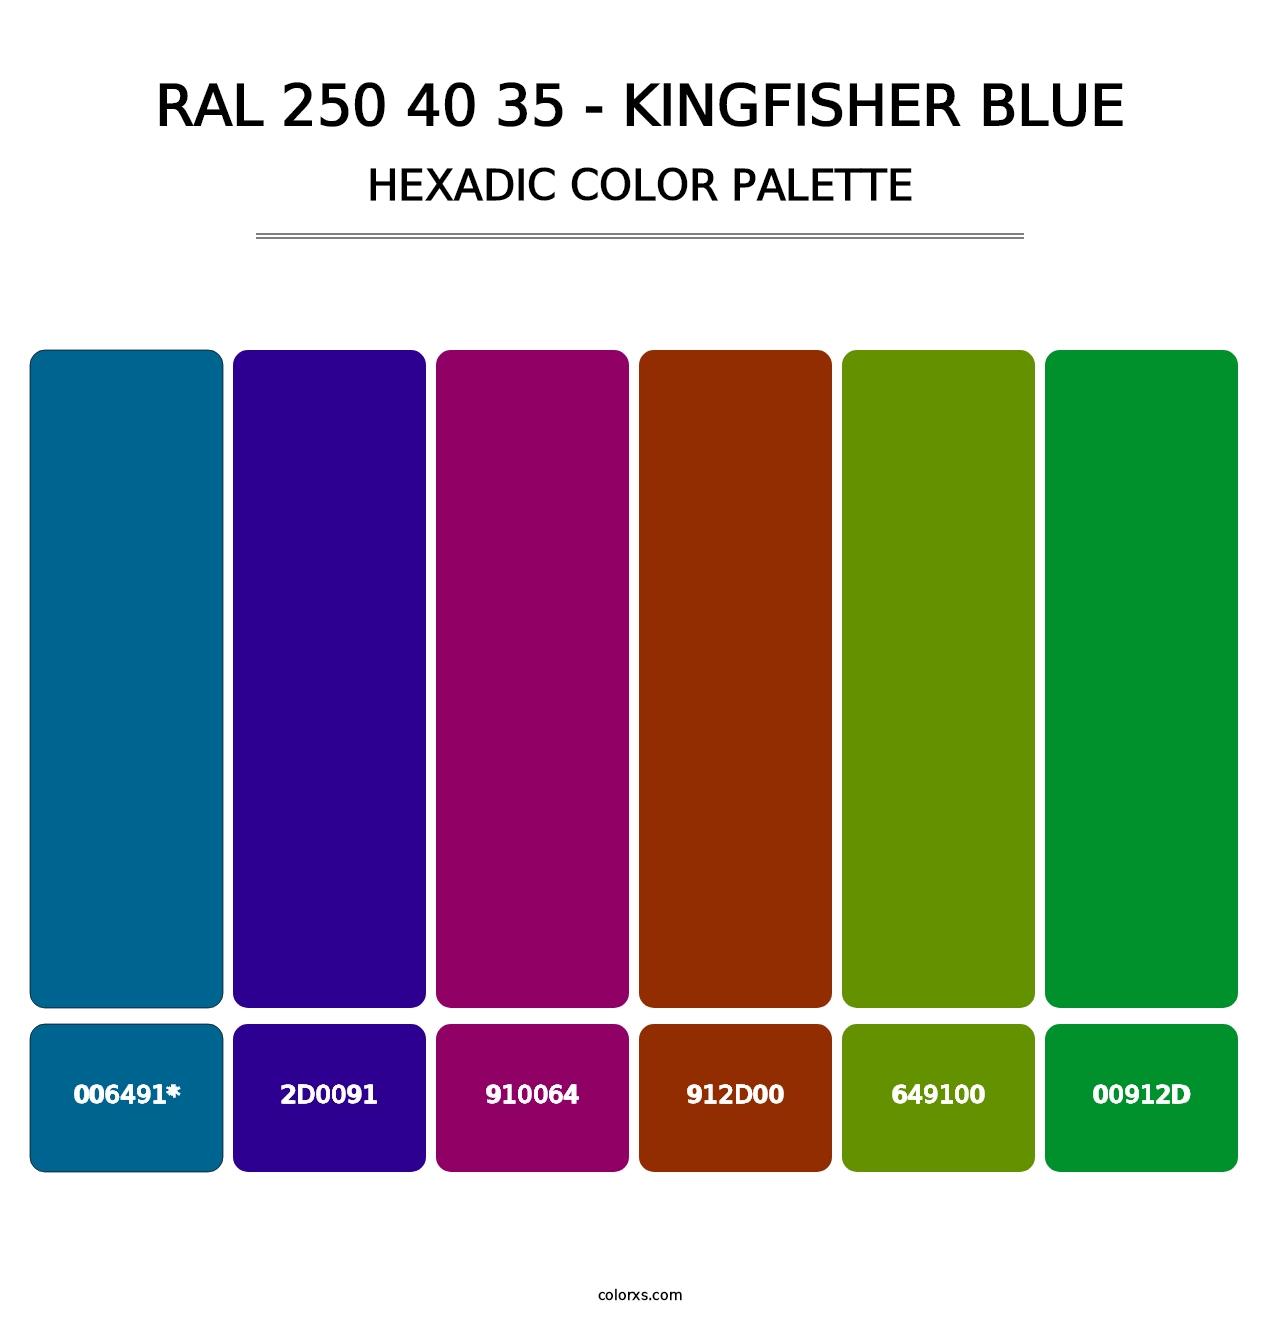 RAL 250 40 35 - Kingfisher Blue - Hexadic Color Palette